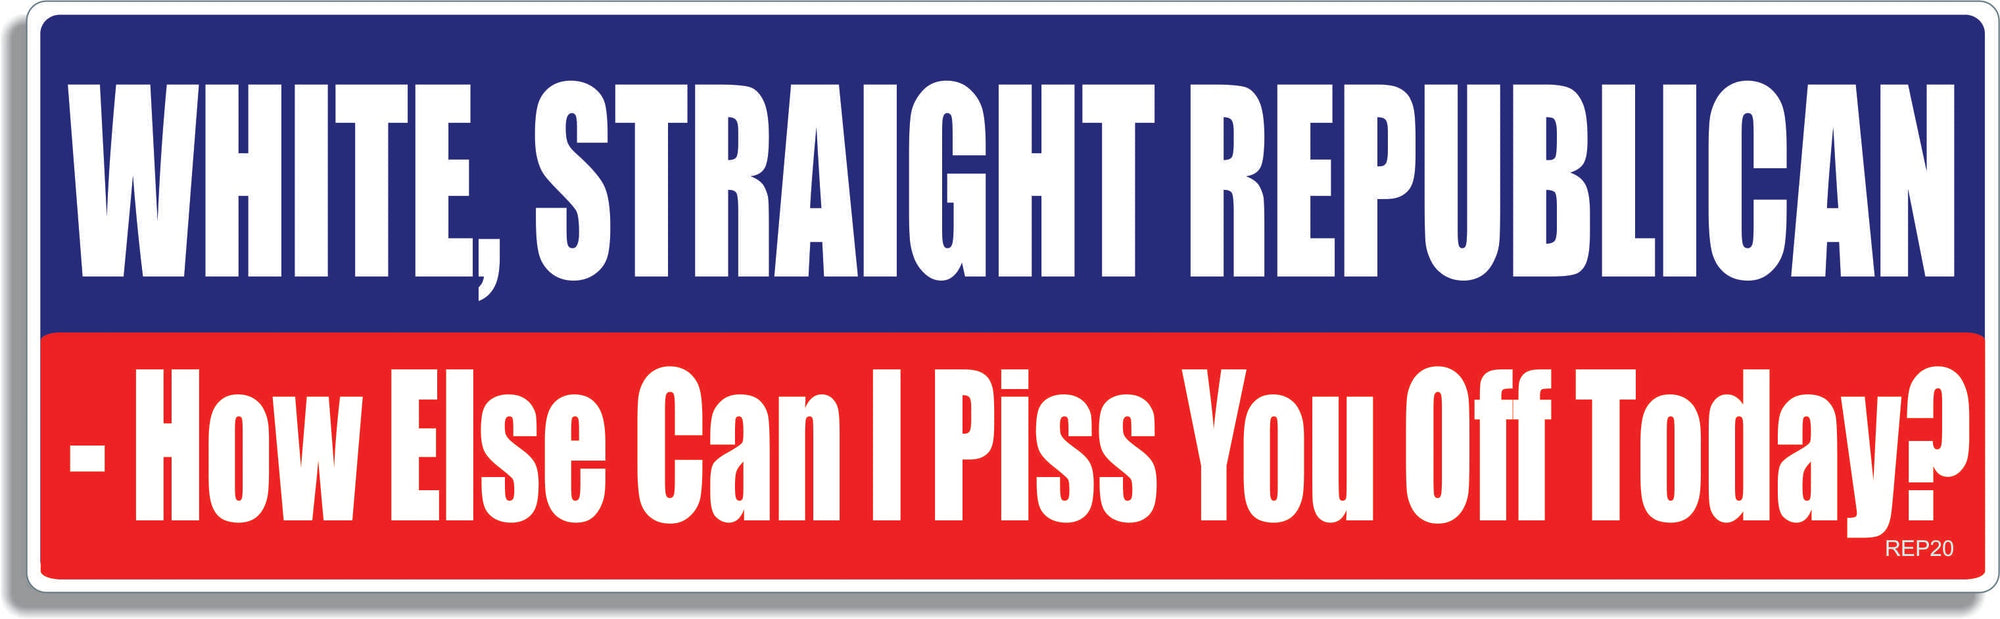 White, straight Republican - How else can i piss you off today? - 3" x 10" Bumper Sticker--Car Magnet- -  Decal Bumper Sticker-conservative Bumper Sticker Car Magnet White, straight Republican-  Decal for carsconservative, gop, republican